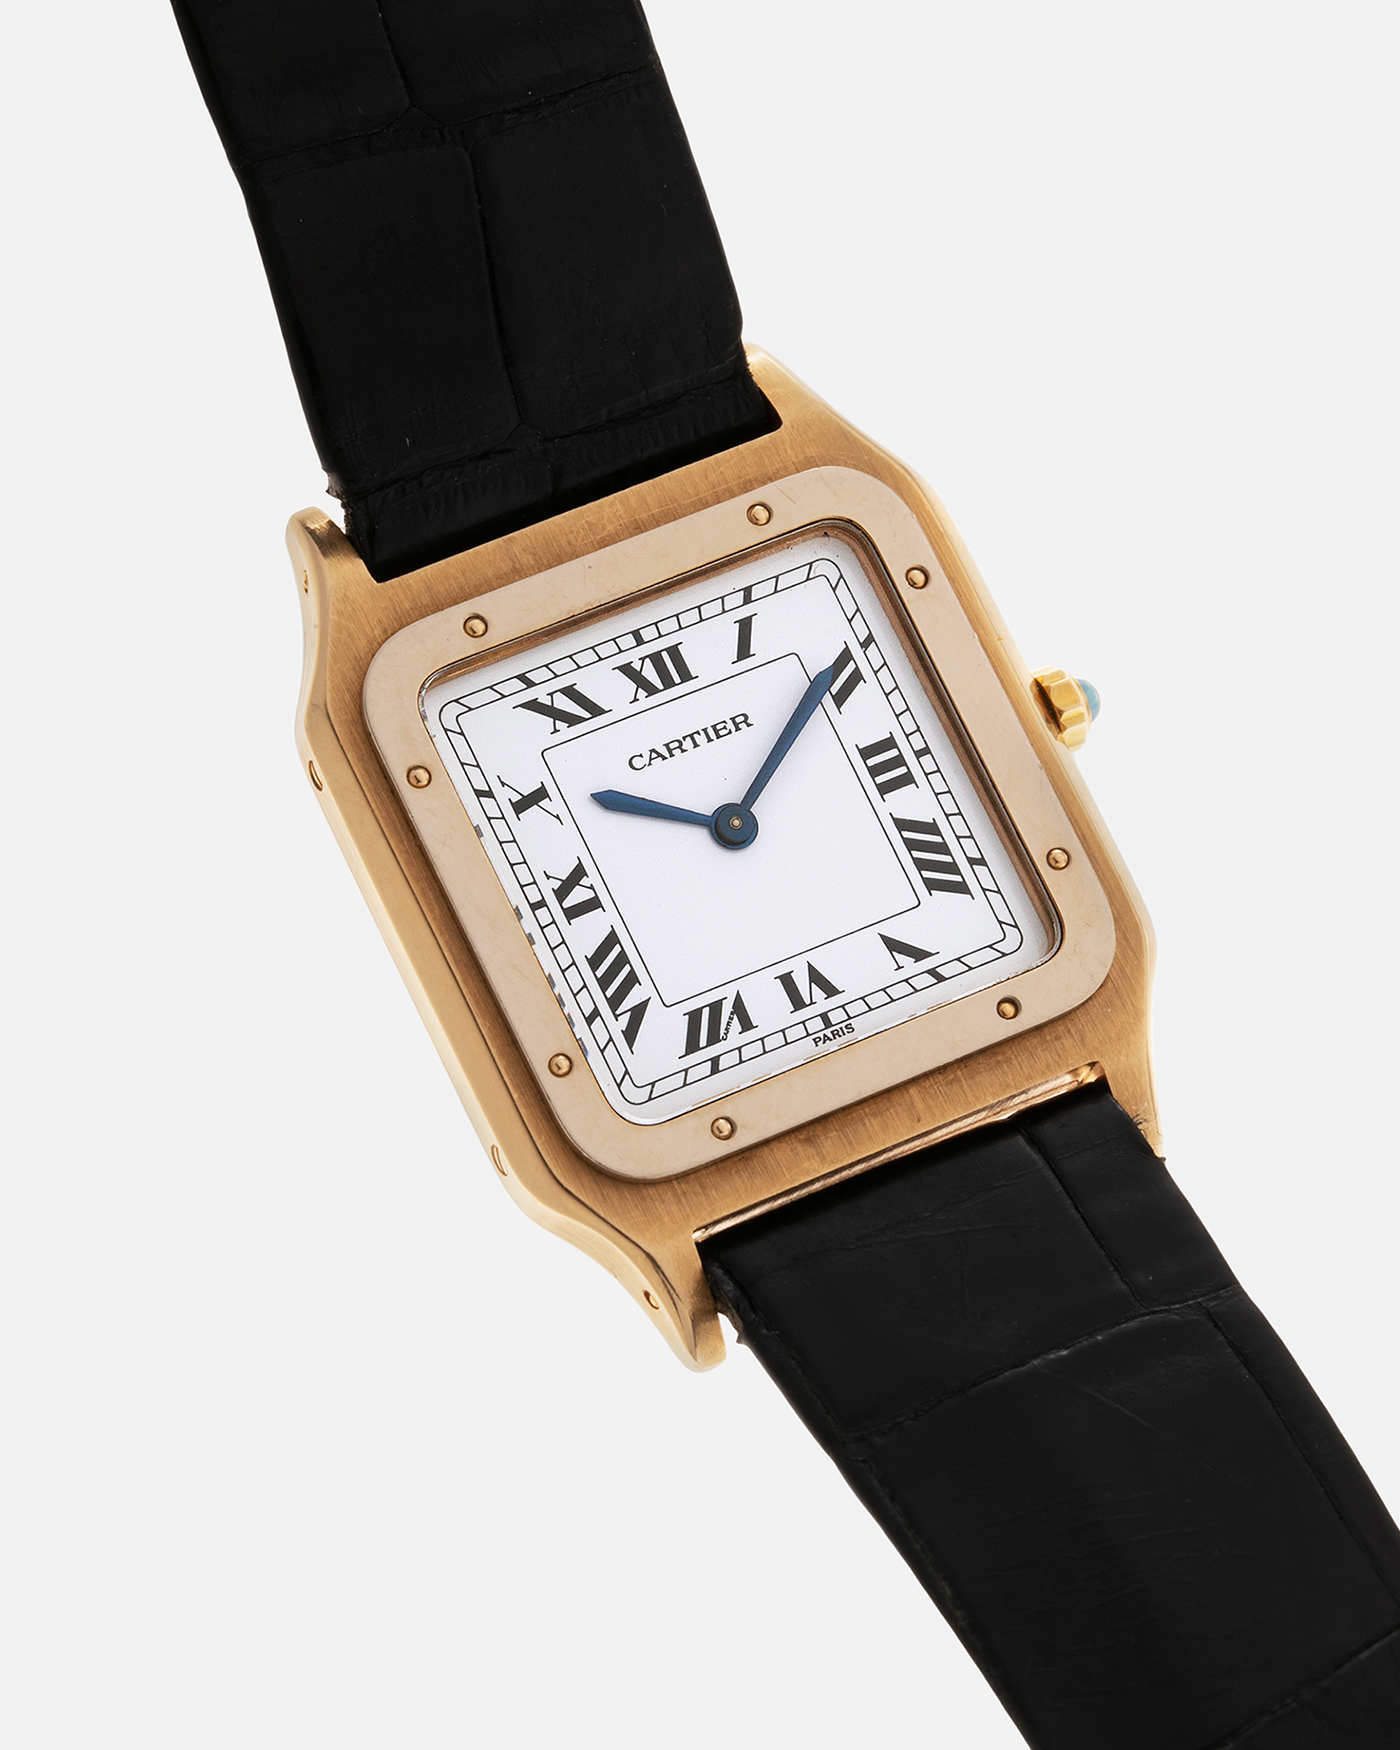 Brand: Cartier Year: 1980s Model: Santos Dumont Reference: 1575 Material: 18-carat Yellow Gold Movement: Frédéric Piguet based Cal. 021 MC, Manual-Winding Case Diameter: 27mm x 36mm Strap: Cartier Black Leather Strap with Signed 18-carat Yellow Gold Tang Buckle